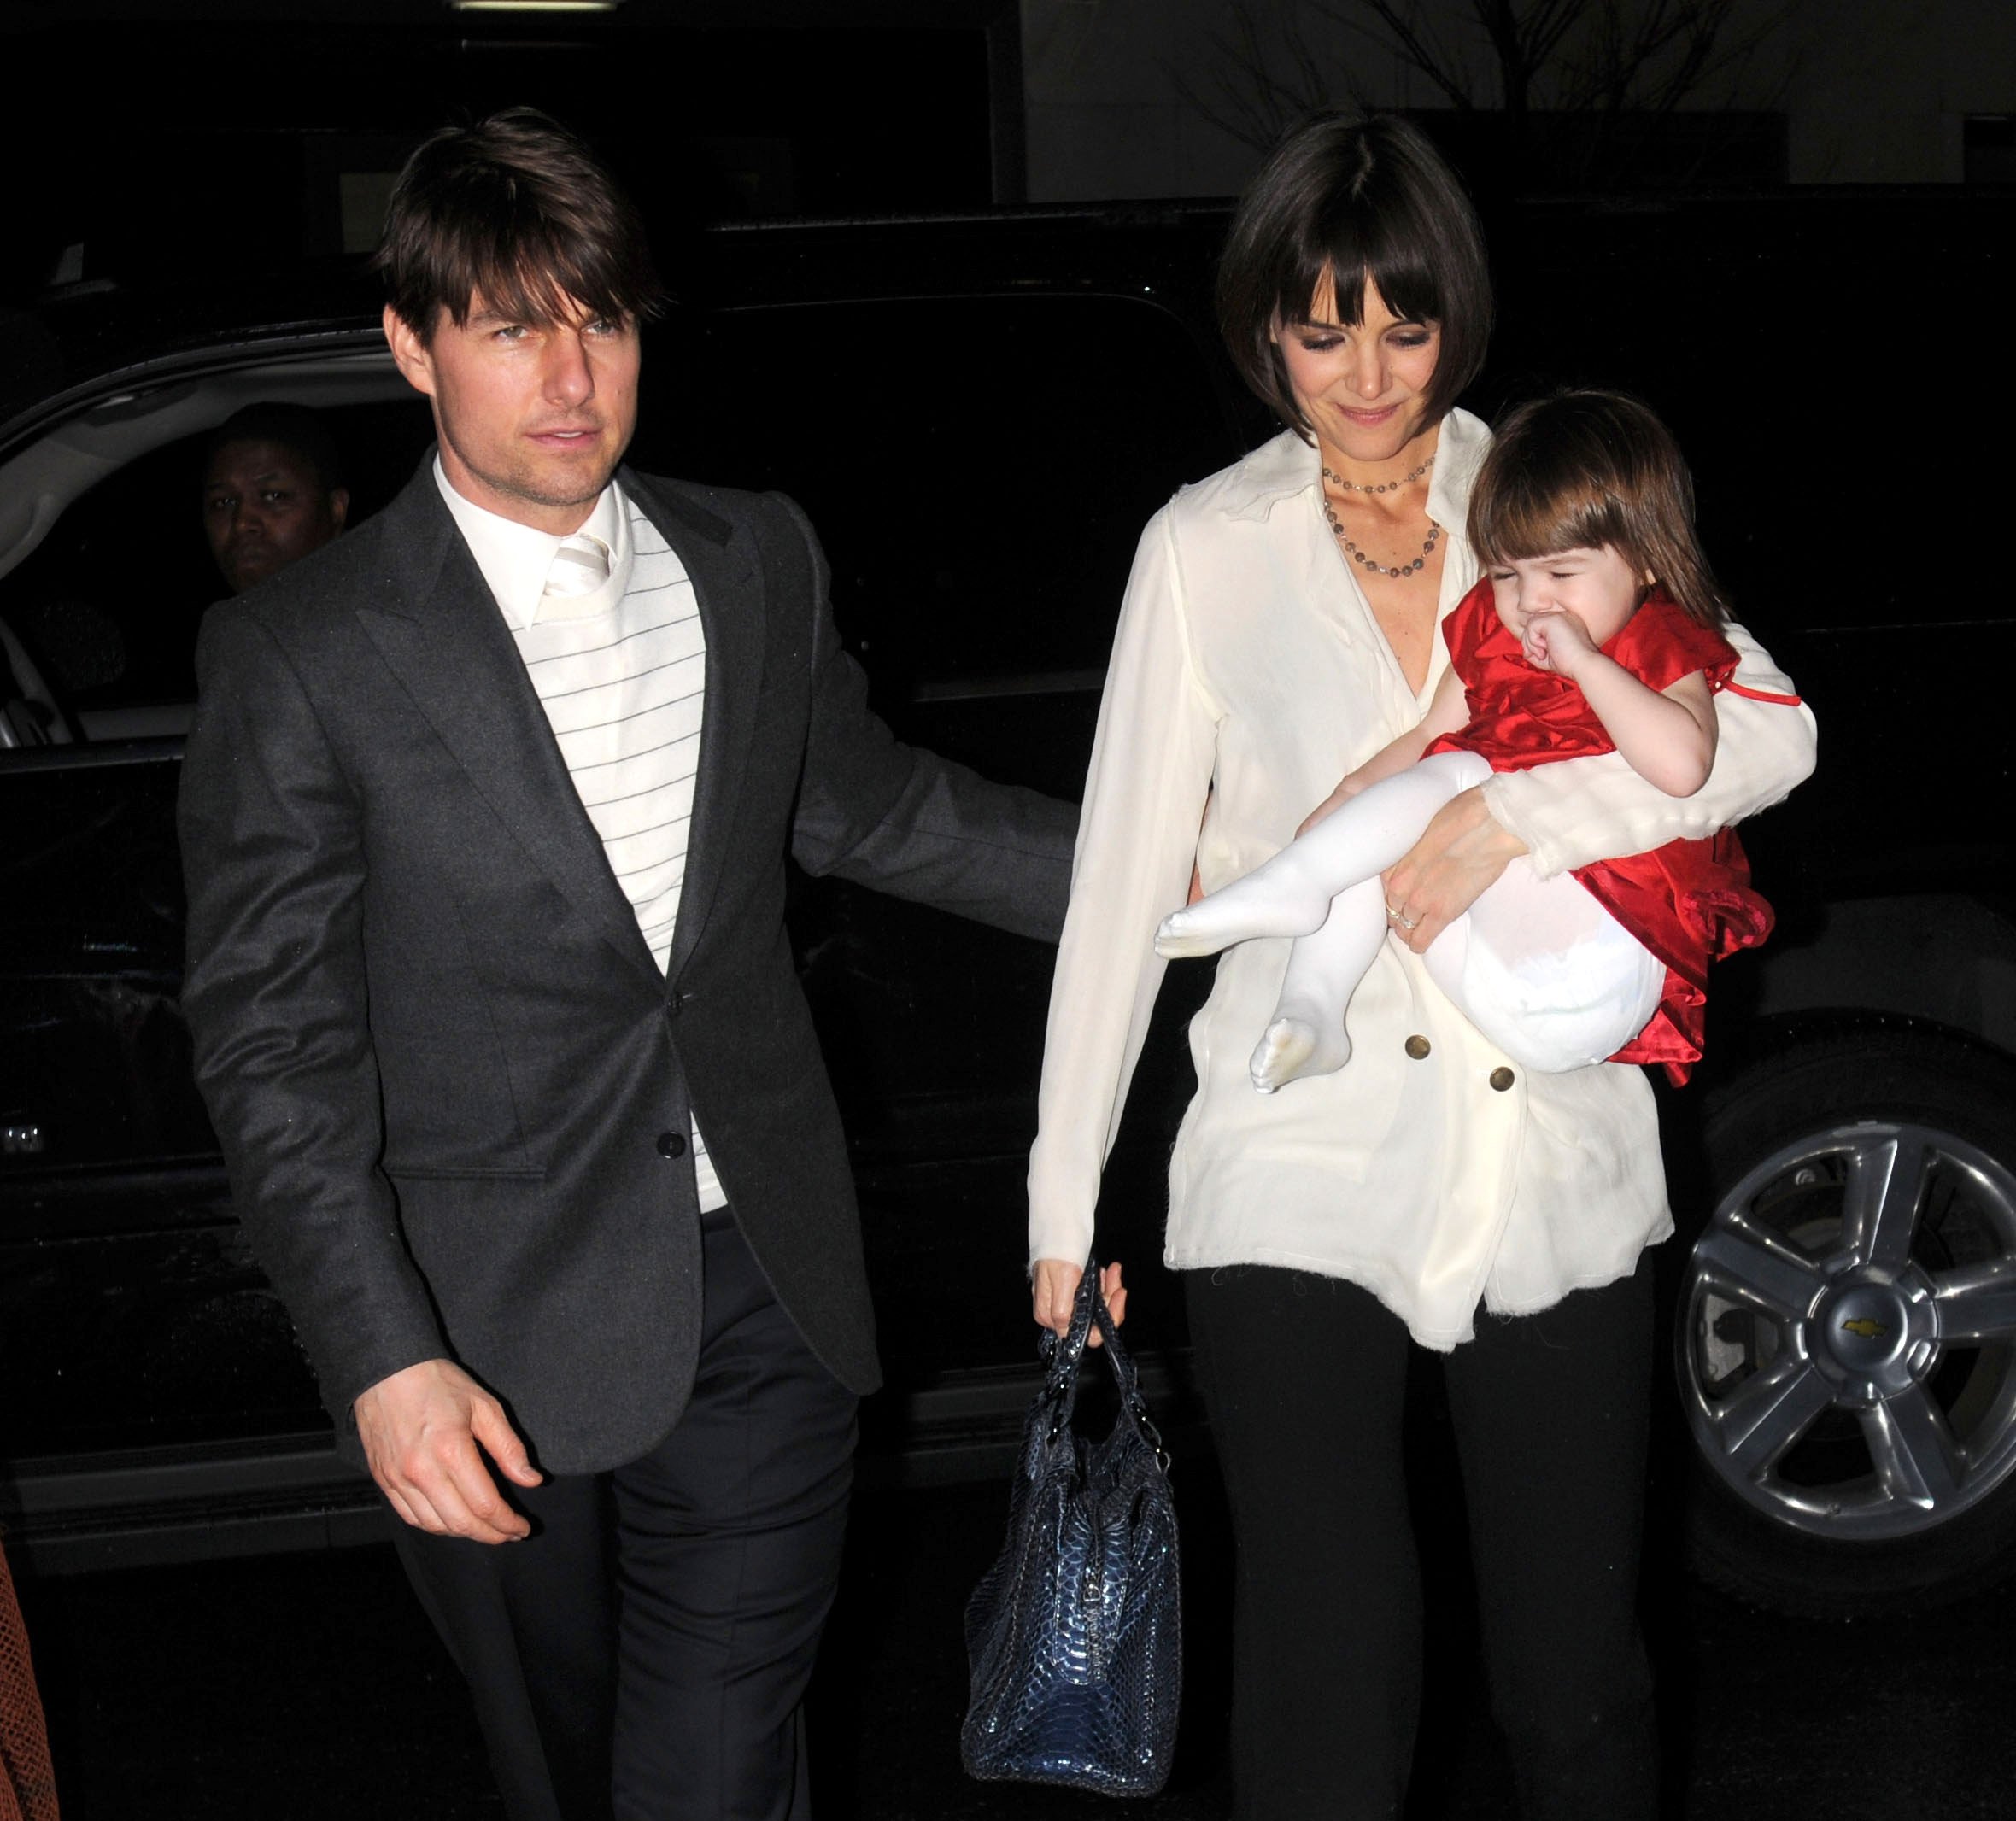 Actors Katie Holmes and Tom Cruise and their daughter Suri leave the midtown hotel on their way to dinner January 14, 2008 in New York City. | Source: Getty Images